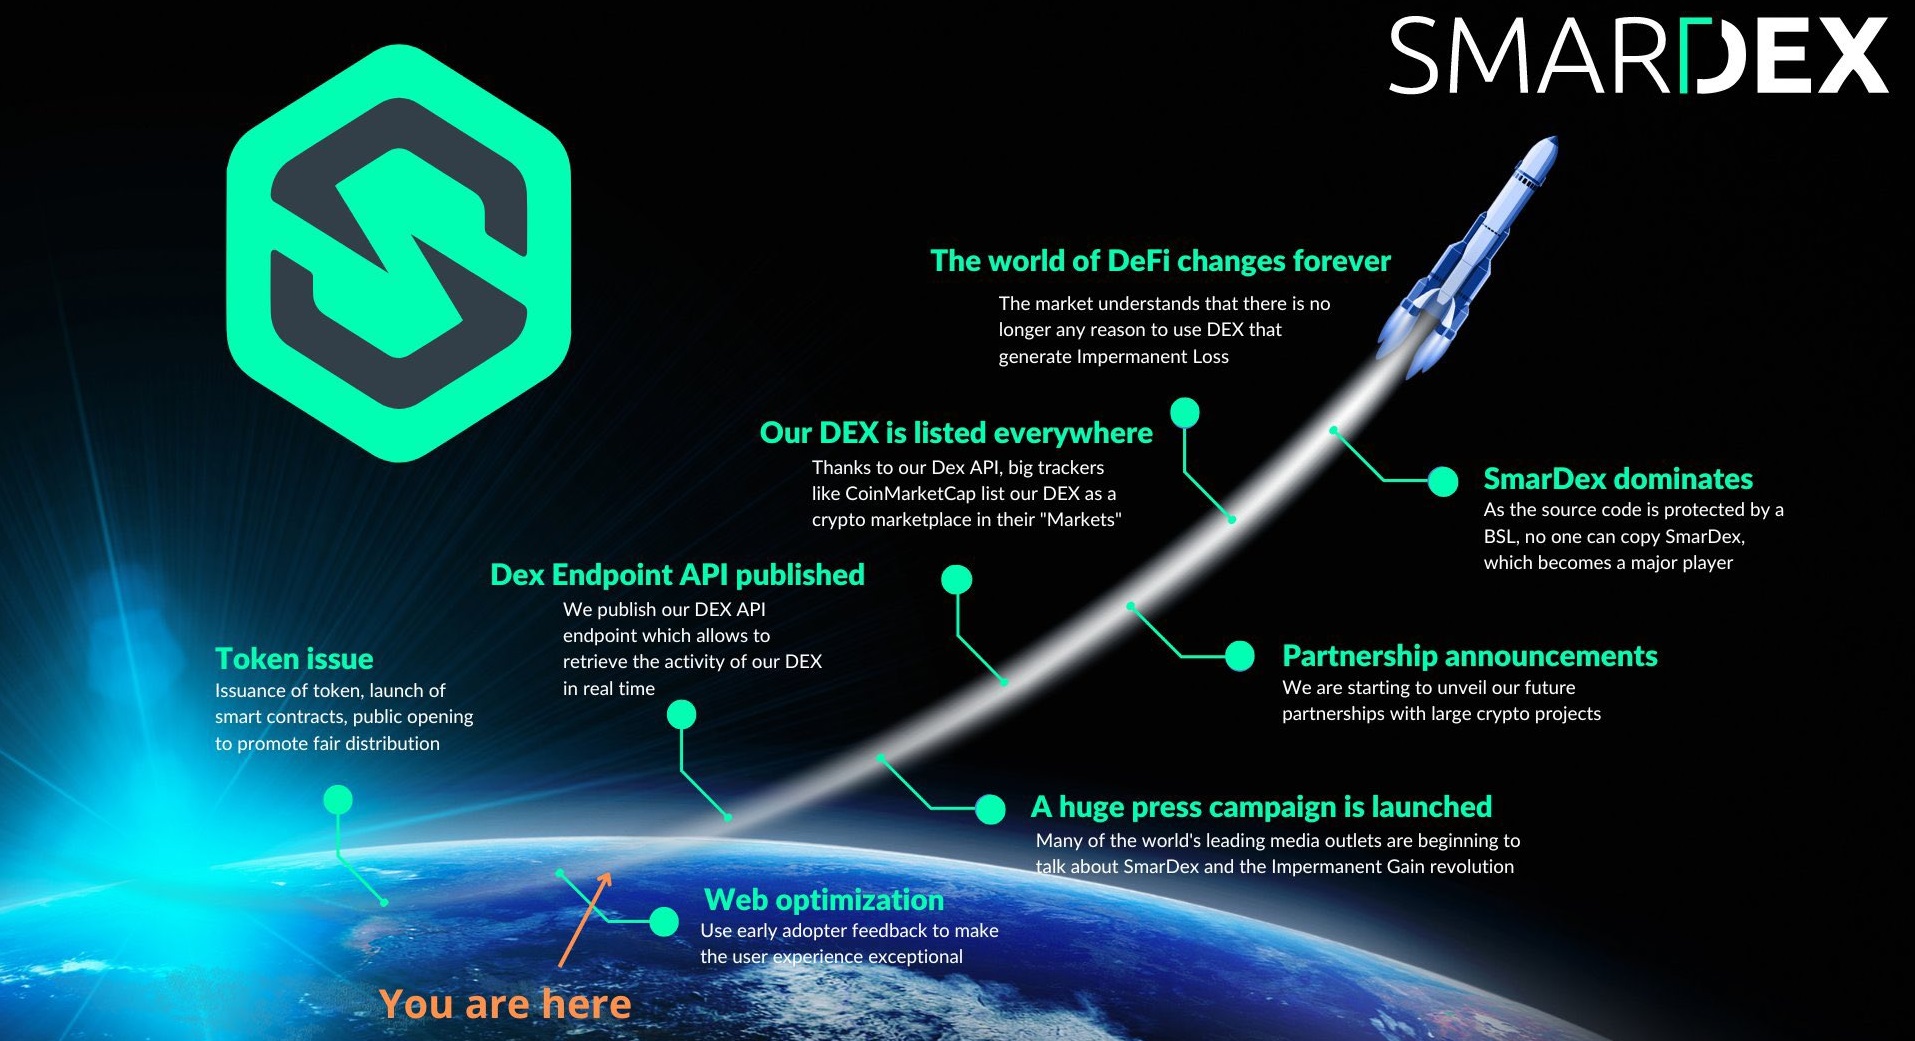 Roadmap marketing material from SmarDex